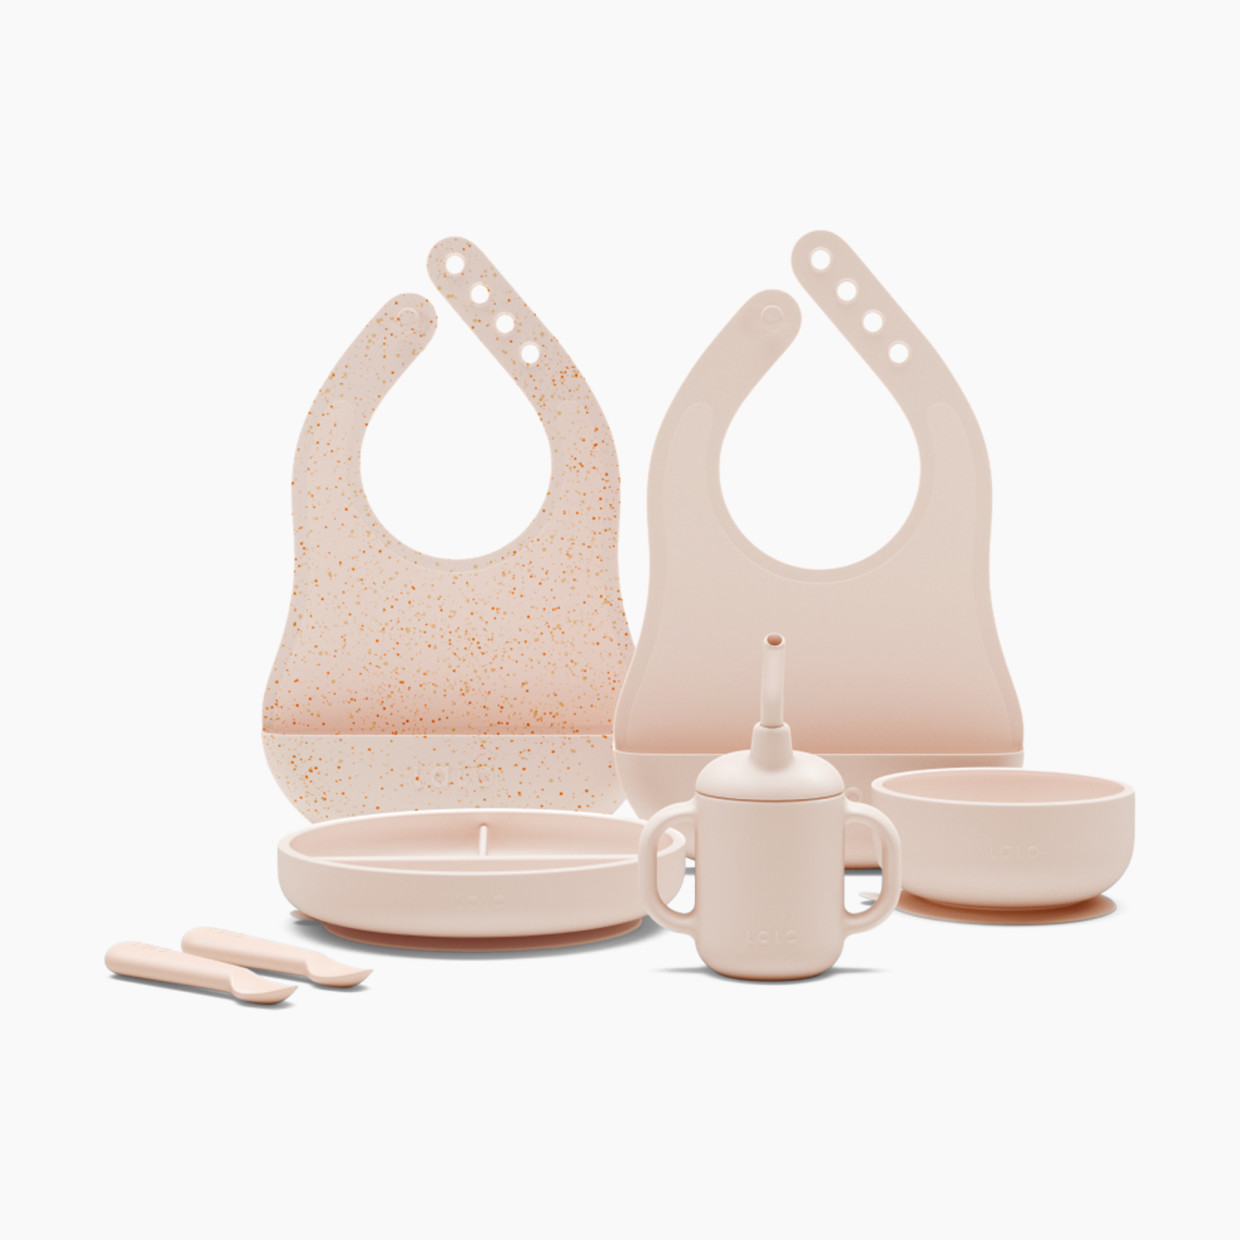 Baby Bowls - Bpa-free Silicone Set For Baby Led Weaning - First